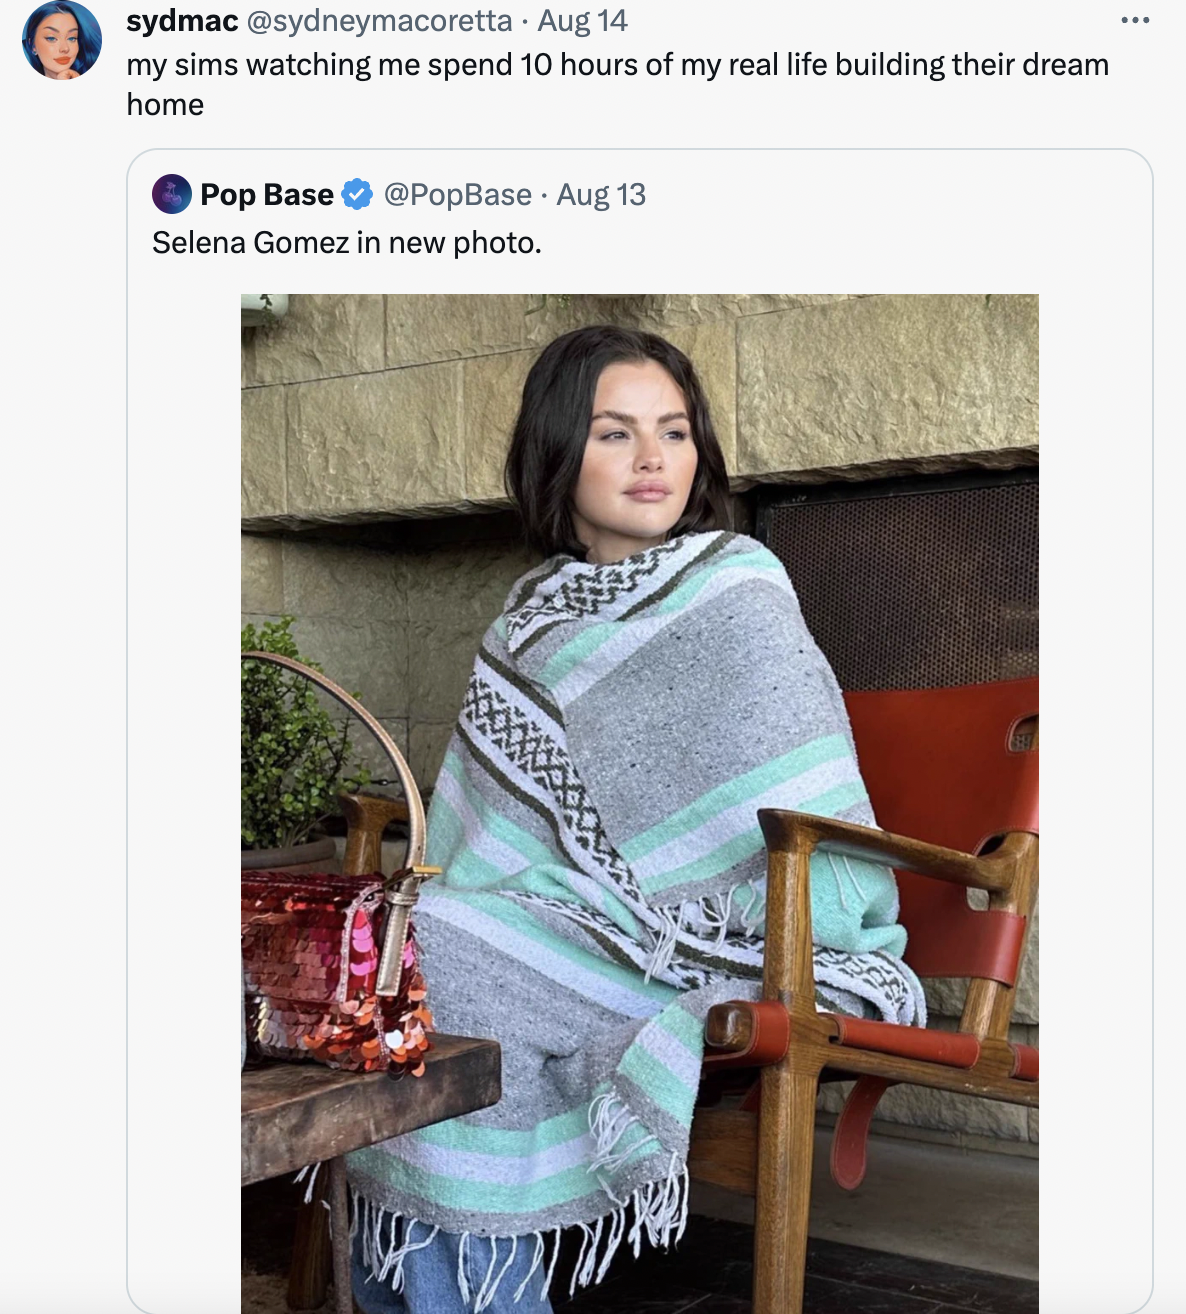 selena gomez in a blanket - stole - sydmac Aug 14 my sims watching me spend 10 hours of my real life building their dream home Pop Base Aug 13 Selena Gomez in new photo. K Ex www